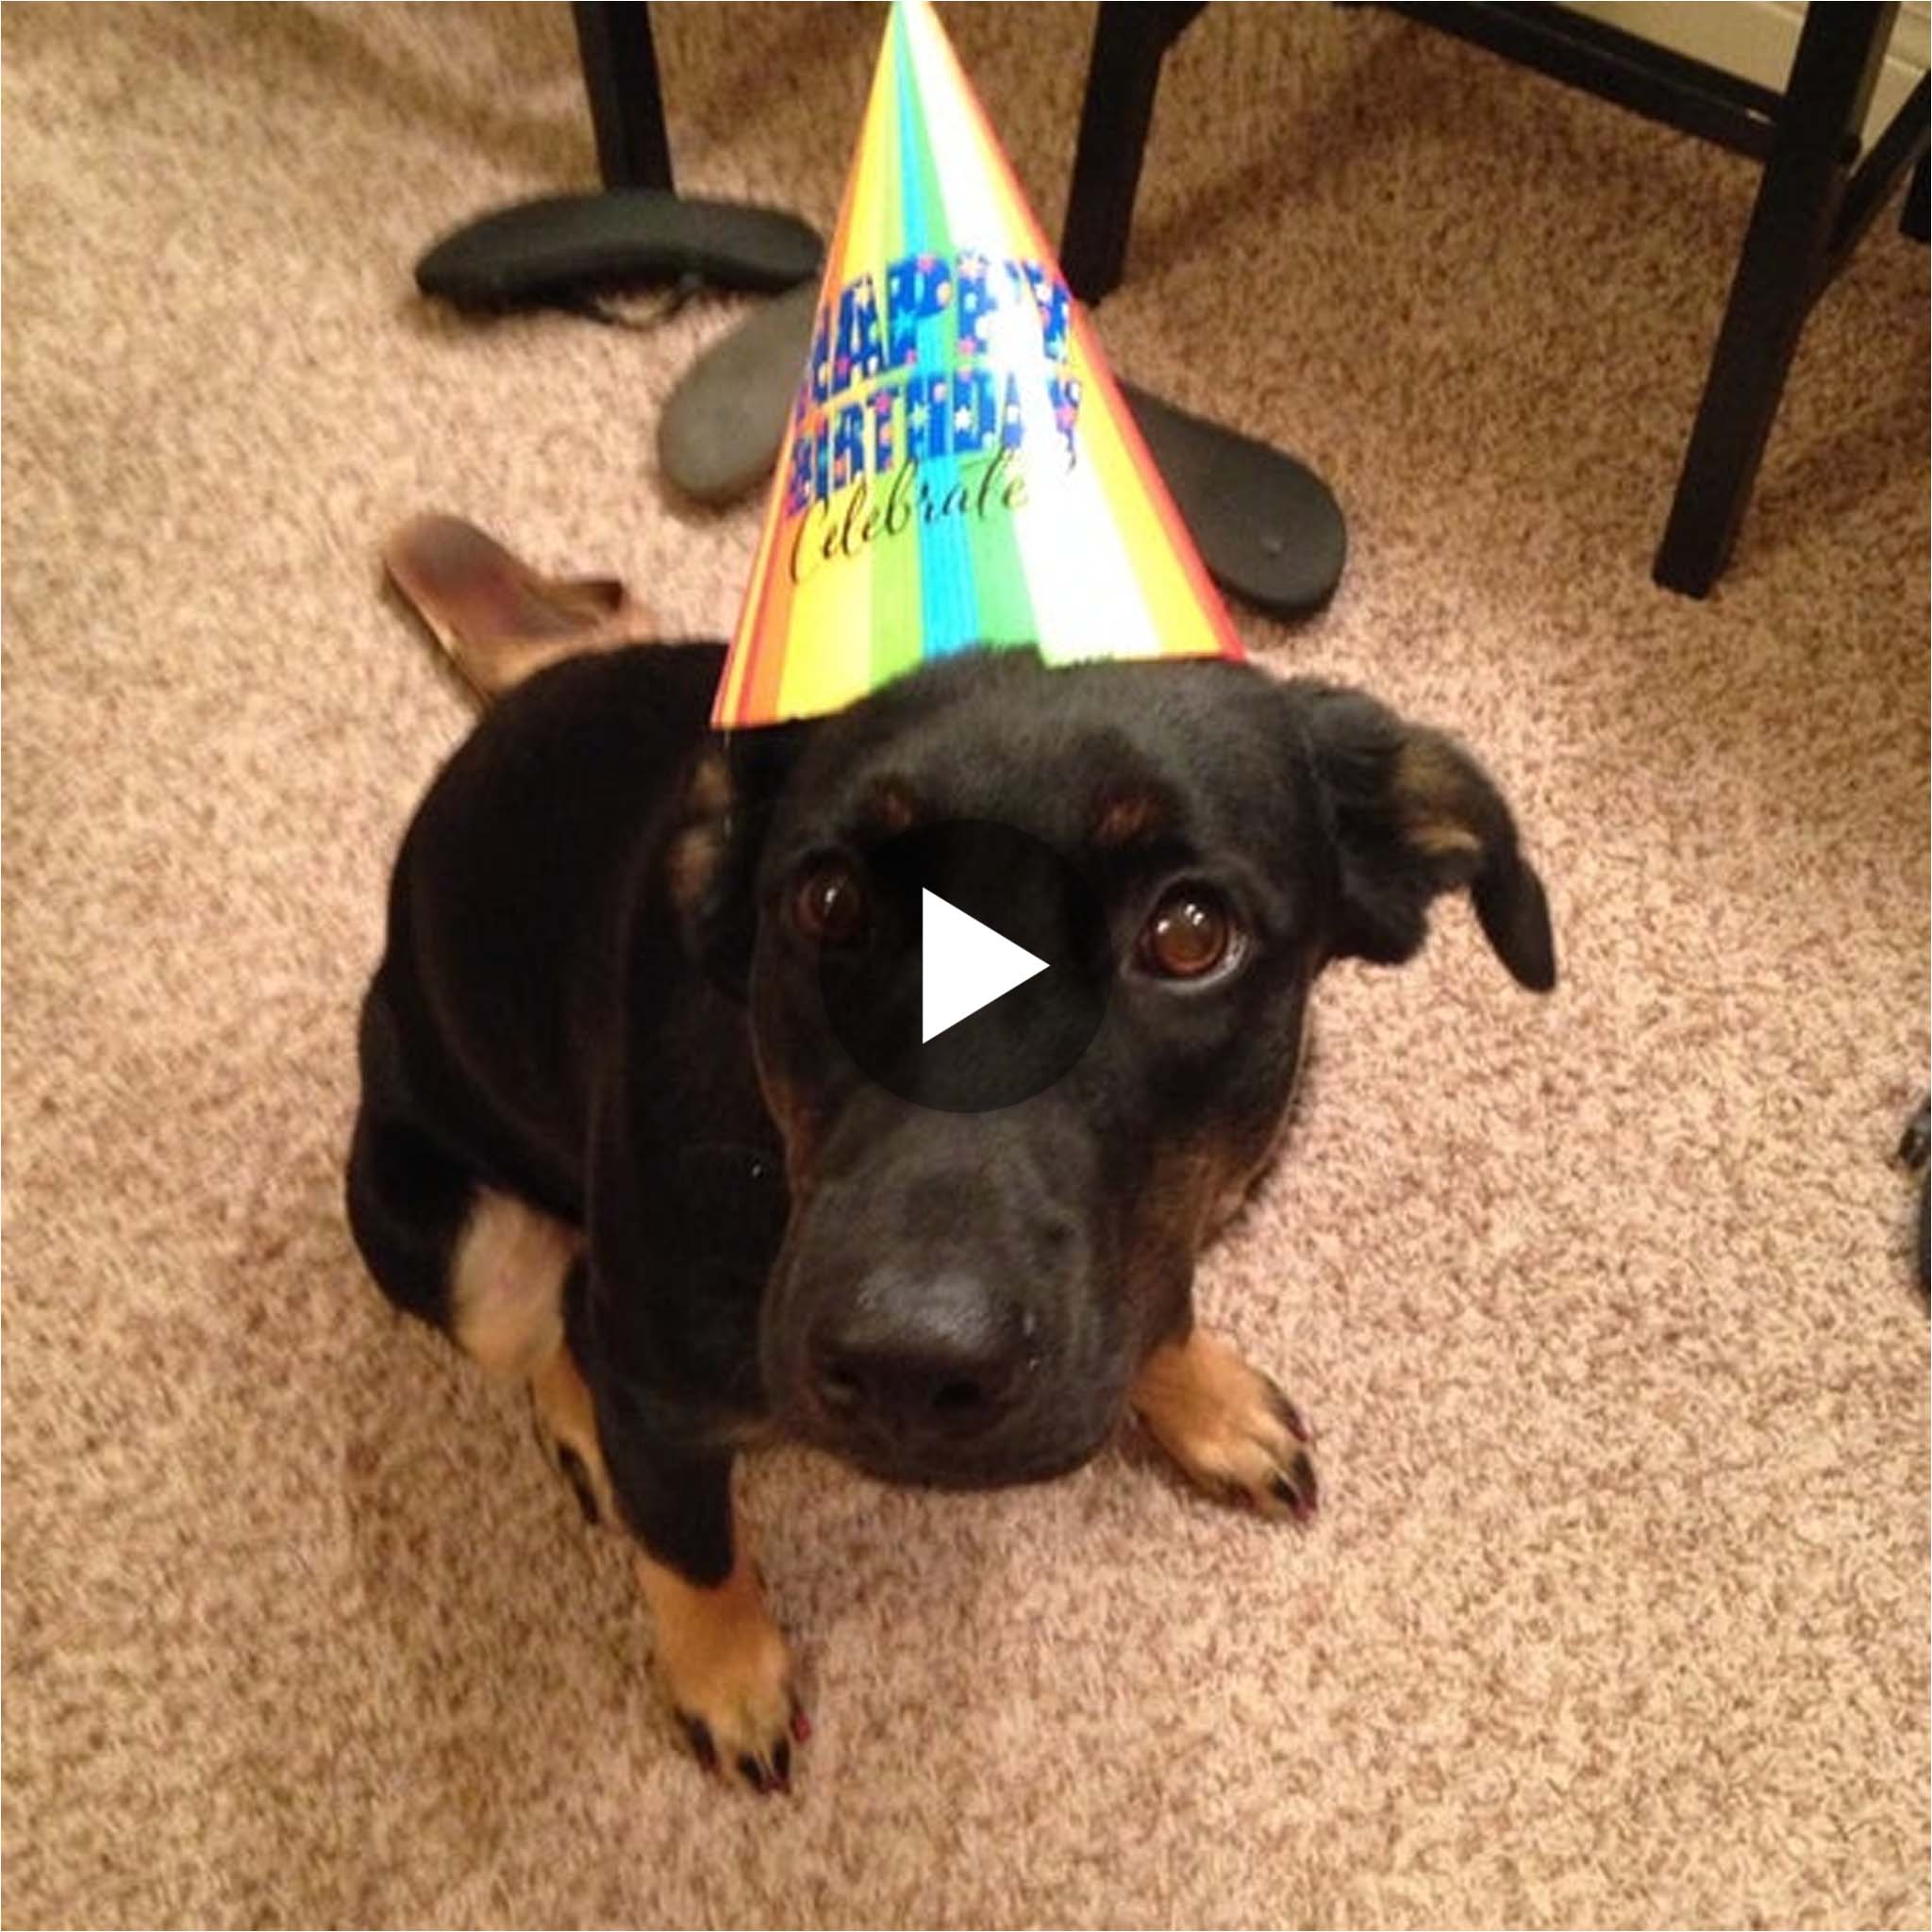 The sad puppy thought “I must be a bad dog: When no one came to wish me a happy birthday”